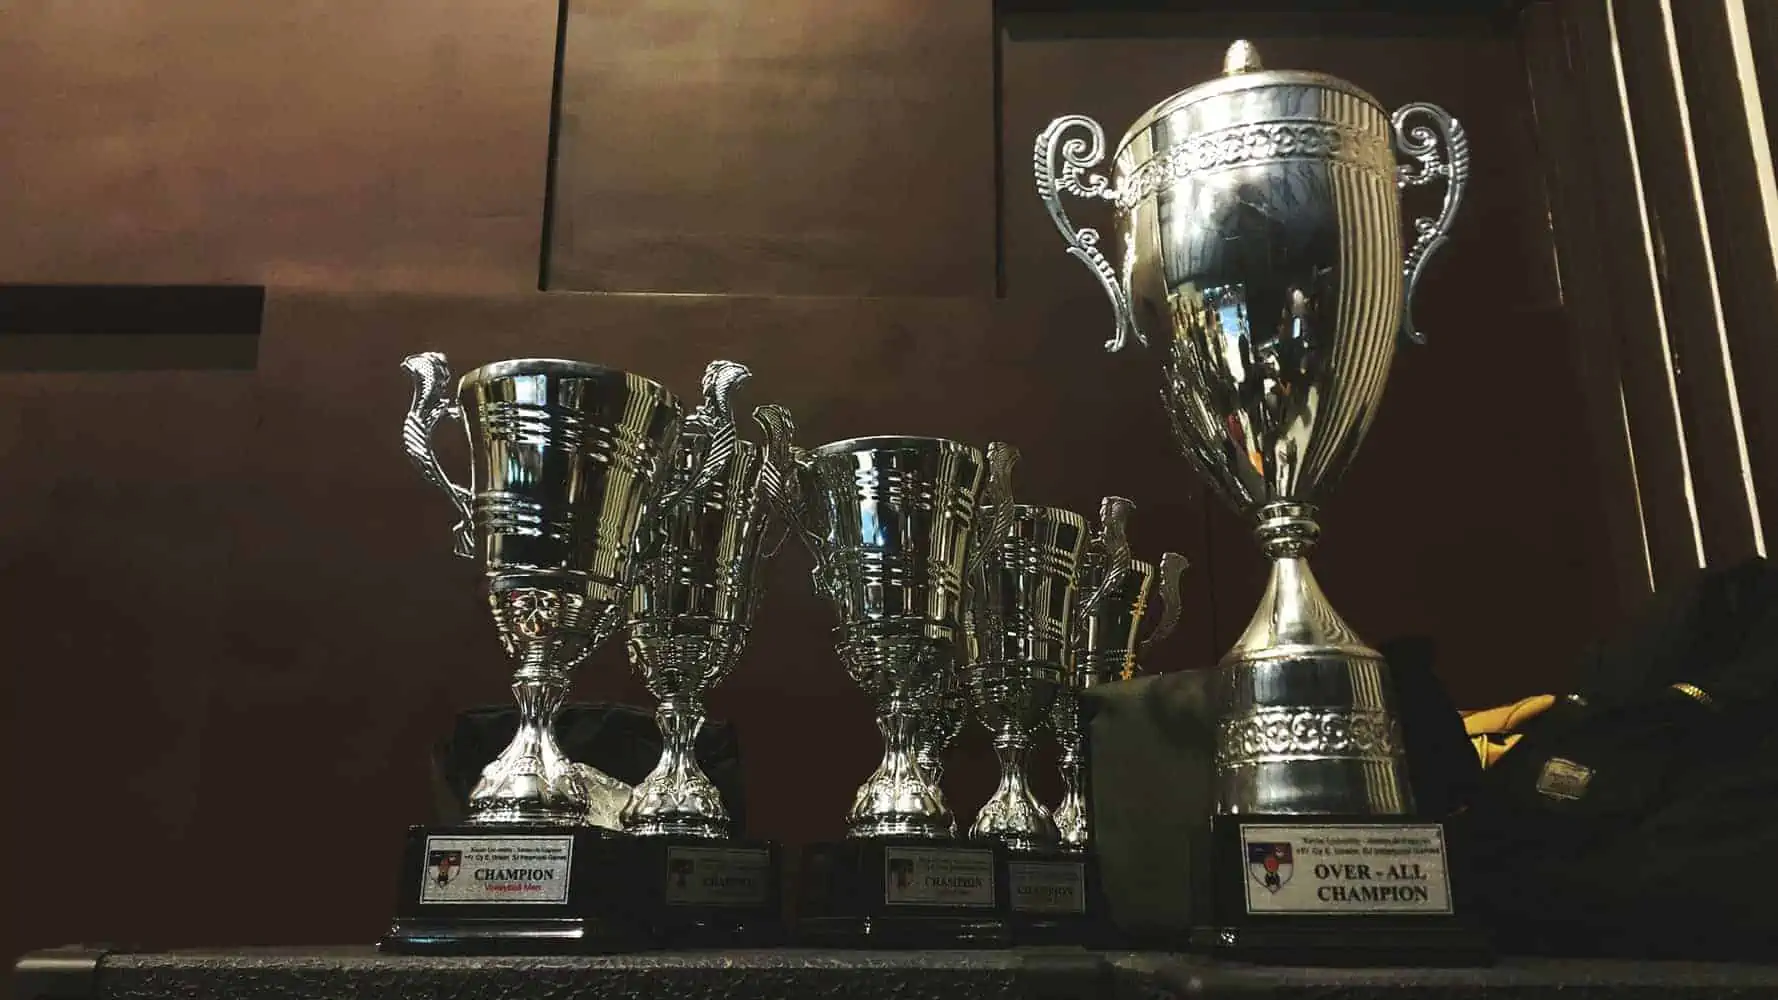 collection of trophy awards on shelf featuring gold colored cups and dark wooden bases with plaques